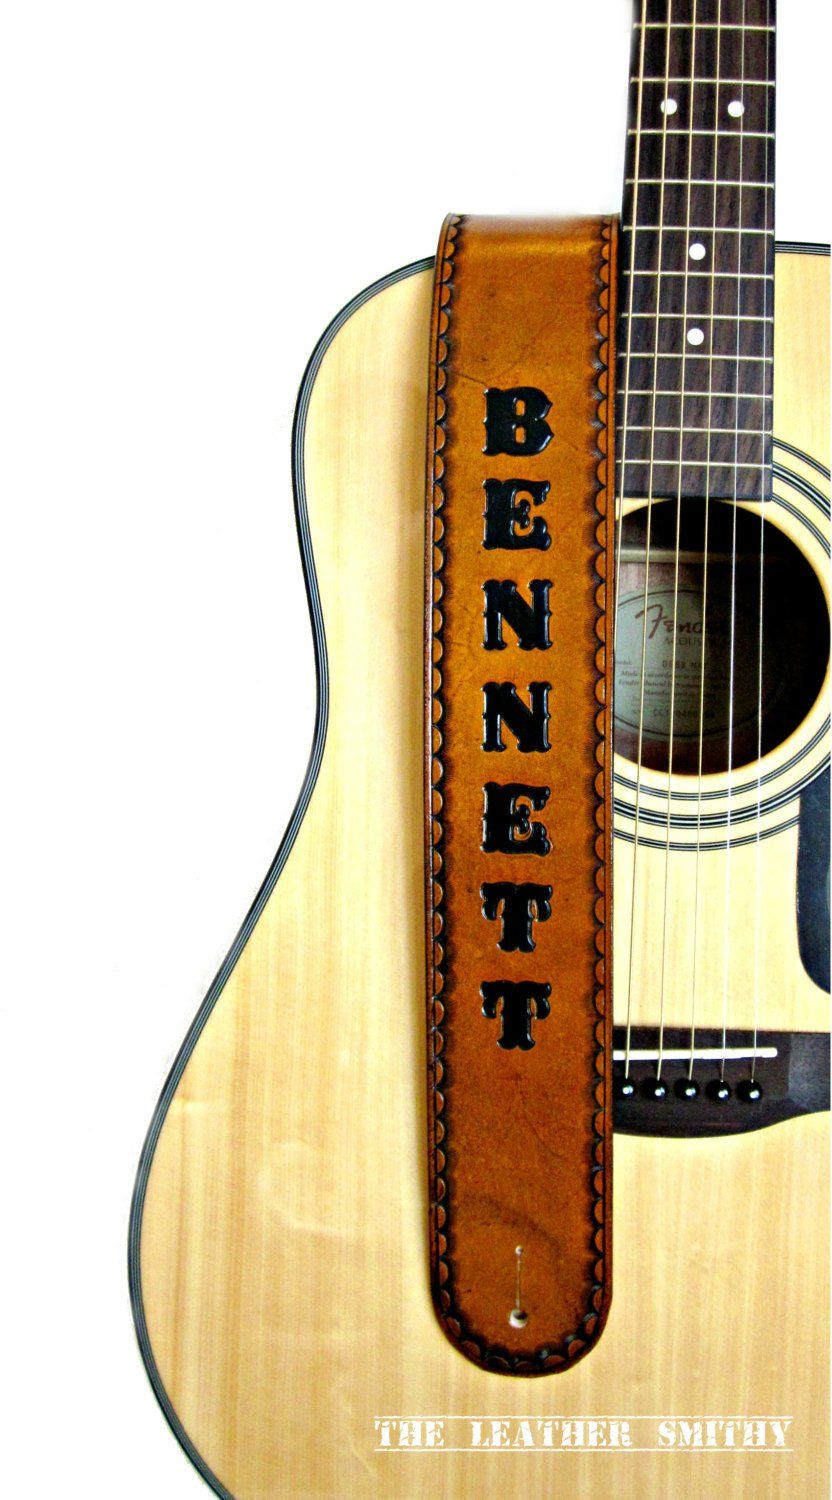 Buy Custom Made Personalized Tan Leather Guitar Strap With Hand Painted  Name Or Initials, made to order from The Leather Smithy